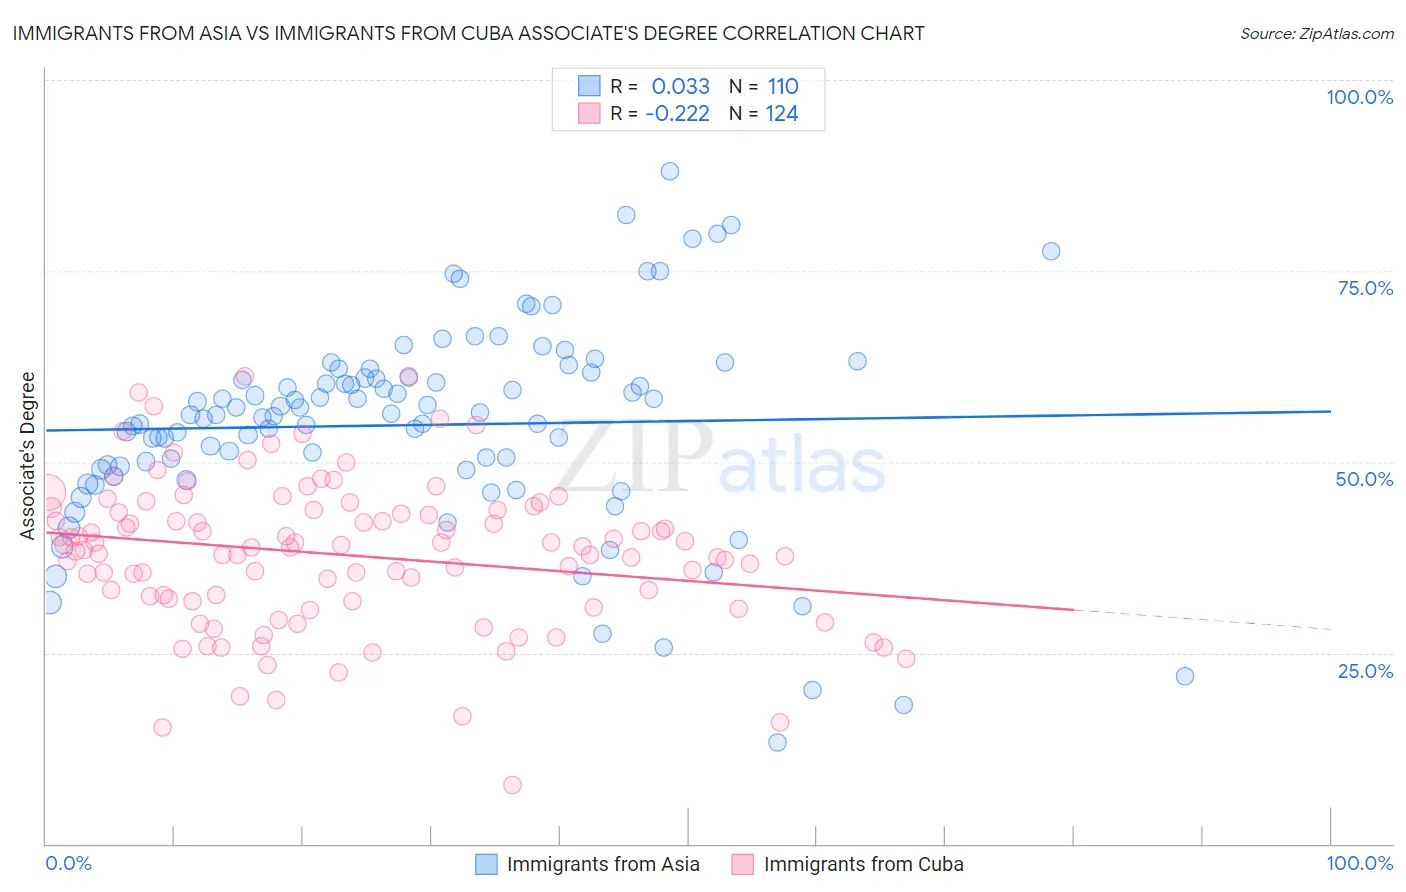 Immigrants from Asia vs Immigrants from Cuba Associate's Degree